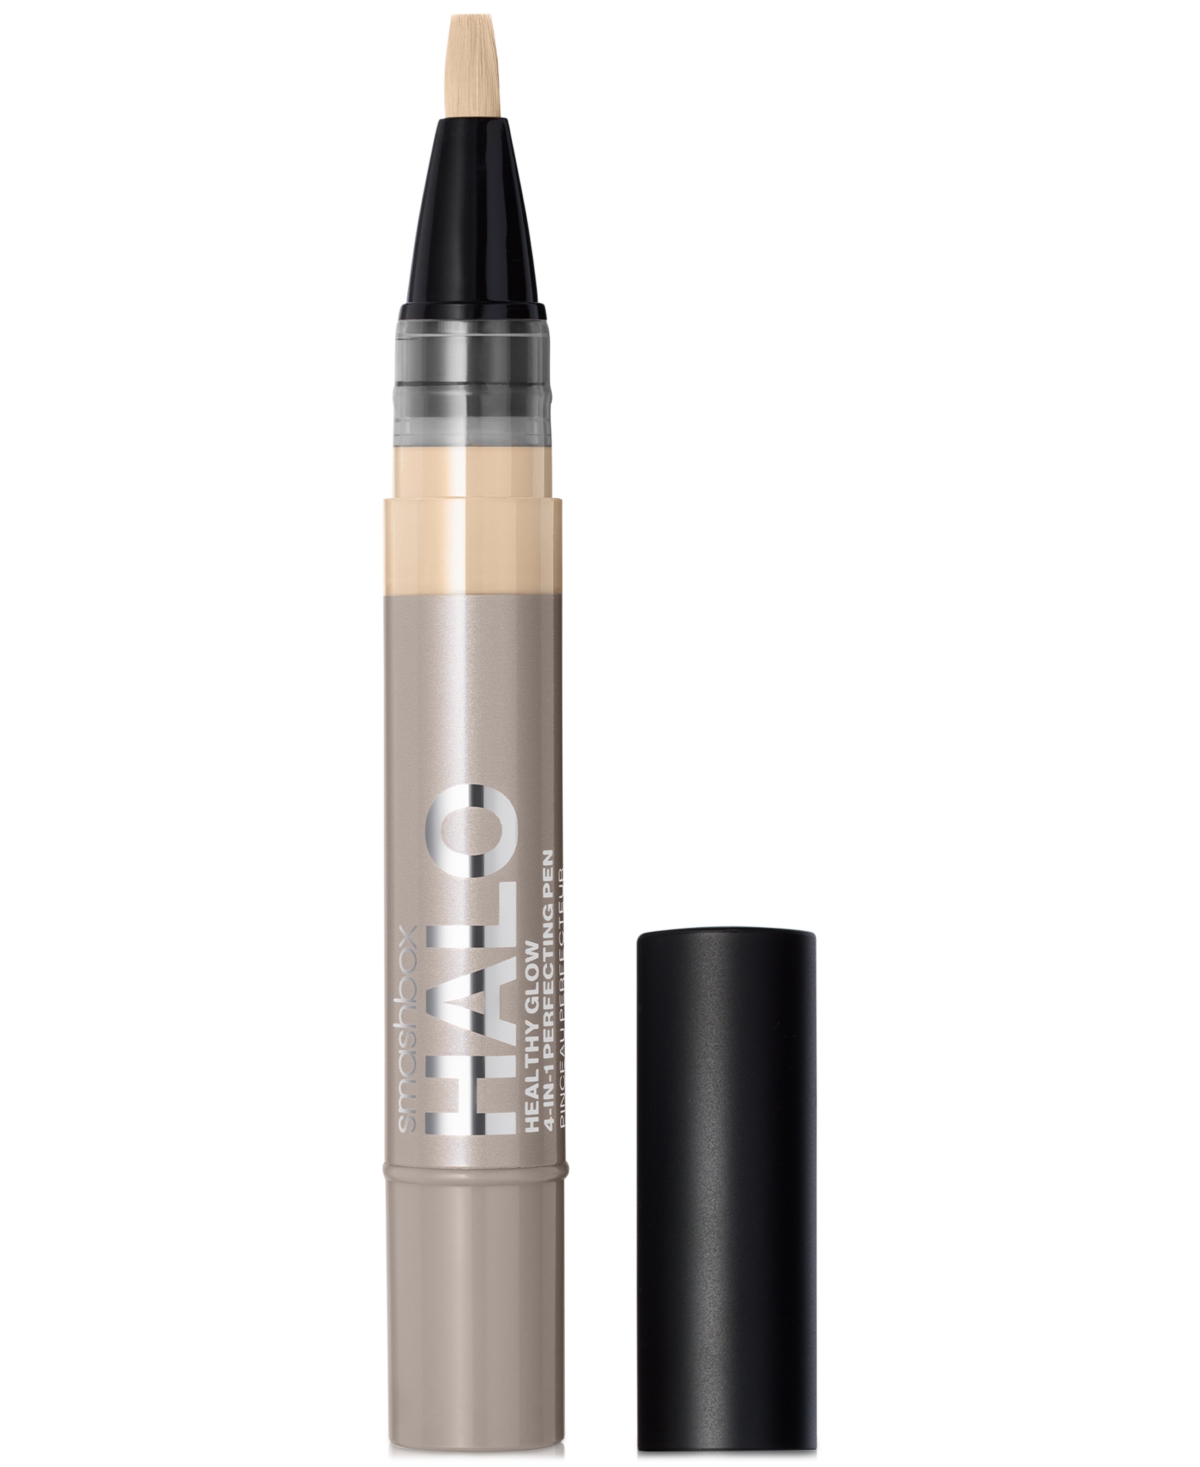 Smashbox Halo Healthy Glow 4-in-1 Perfecting Pen In F-n (level-one Fair With A Neutral Under